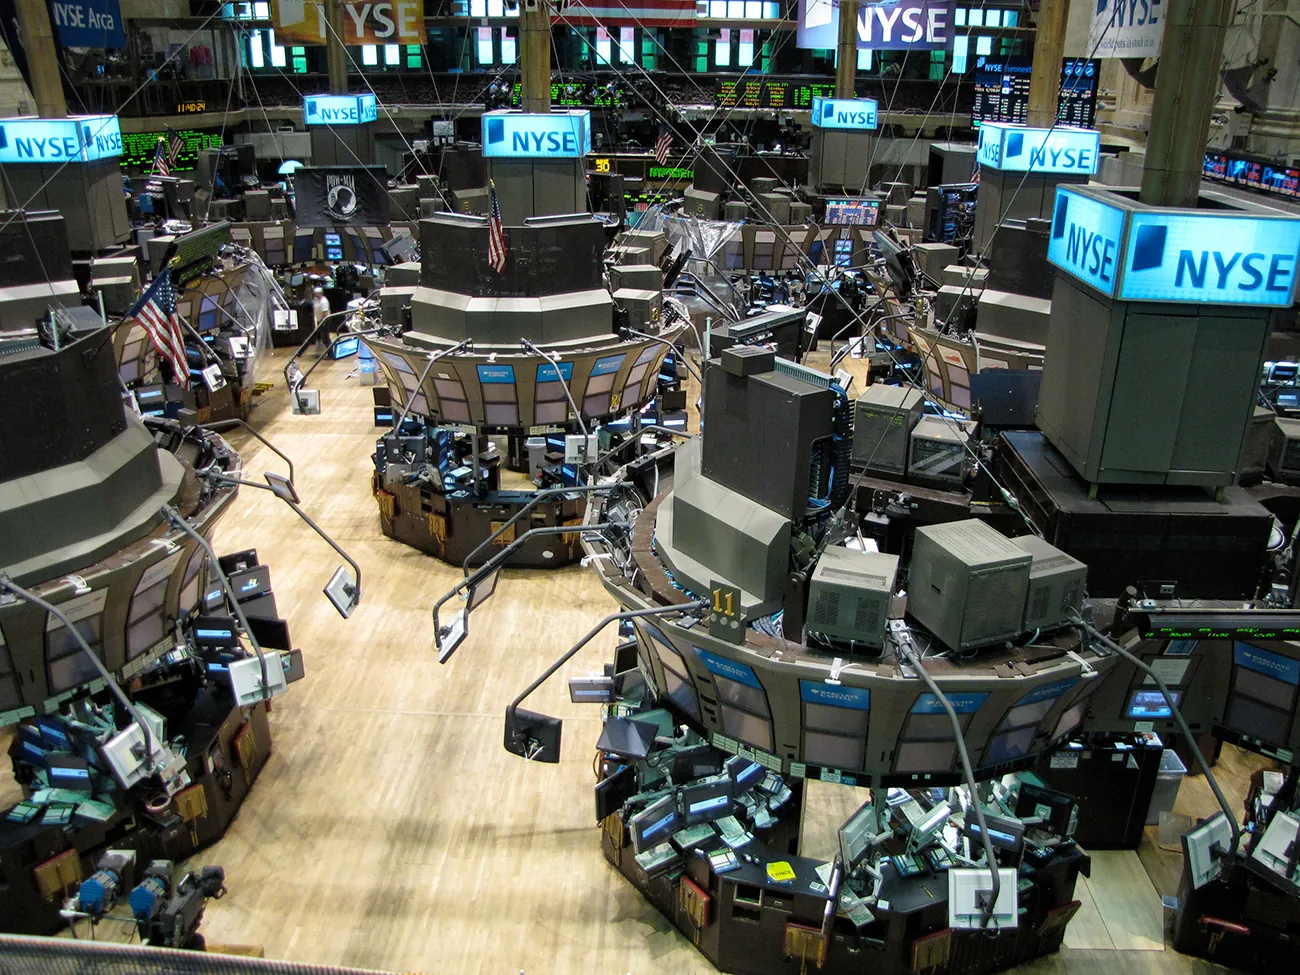 A photograph shows the New York Stock Exchange. The indoor area has many terminals, each one is covered with computers and display screens. In the background there are screens that show stocks and prices.